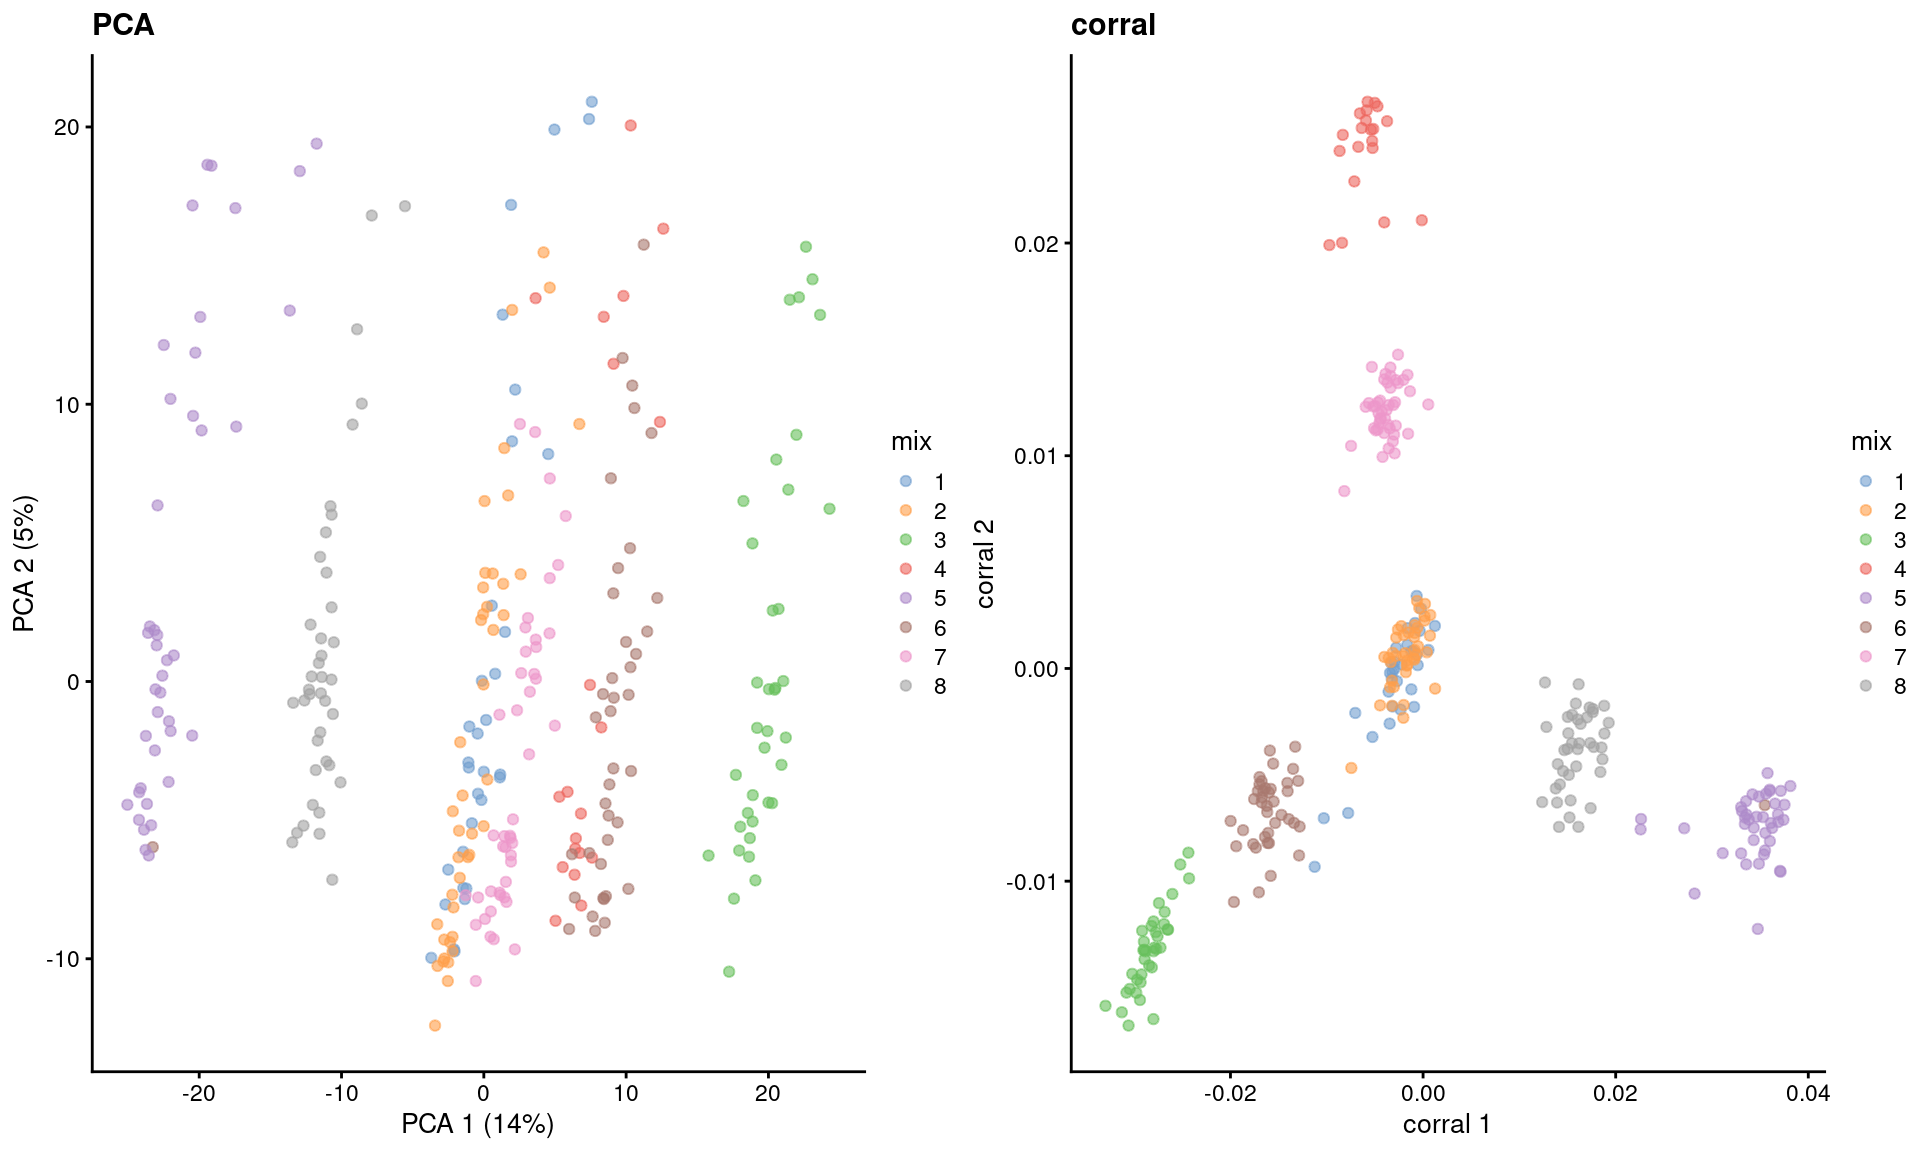 Dimensionality reduction results of all pool-and-split libraries in the SORT-seq CellBench data, computed by a PCA on the log-normalized expression values (left) or using the _corral_ package (right). Each point represents a library and is colored by the mixing ratio used to construct it.